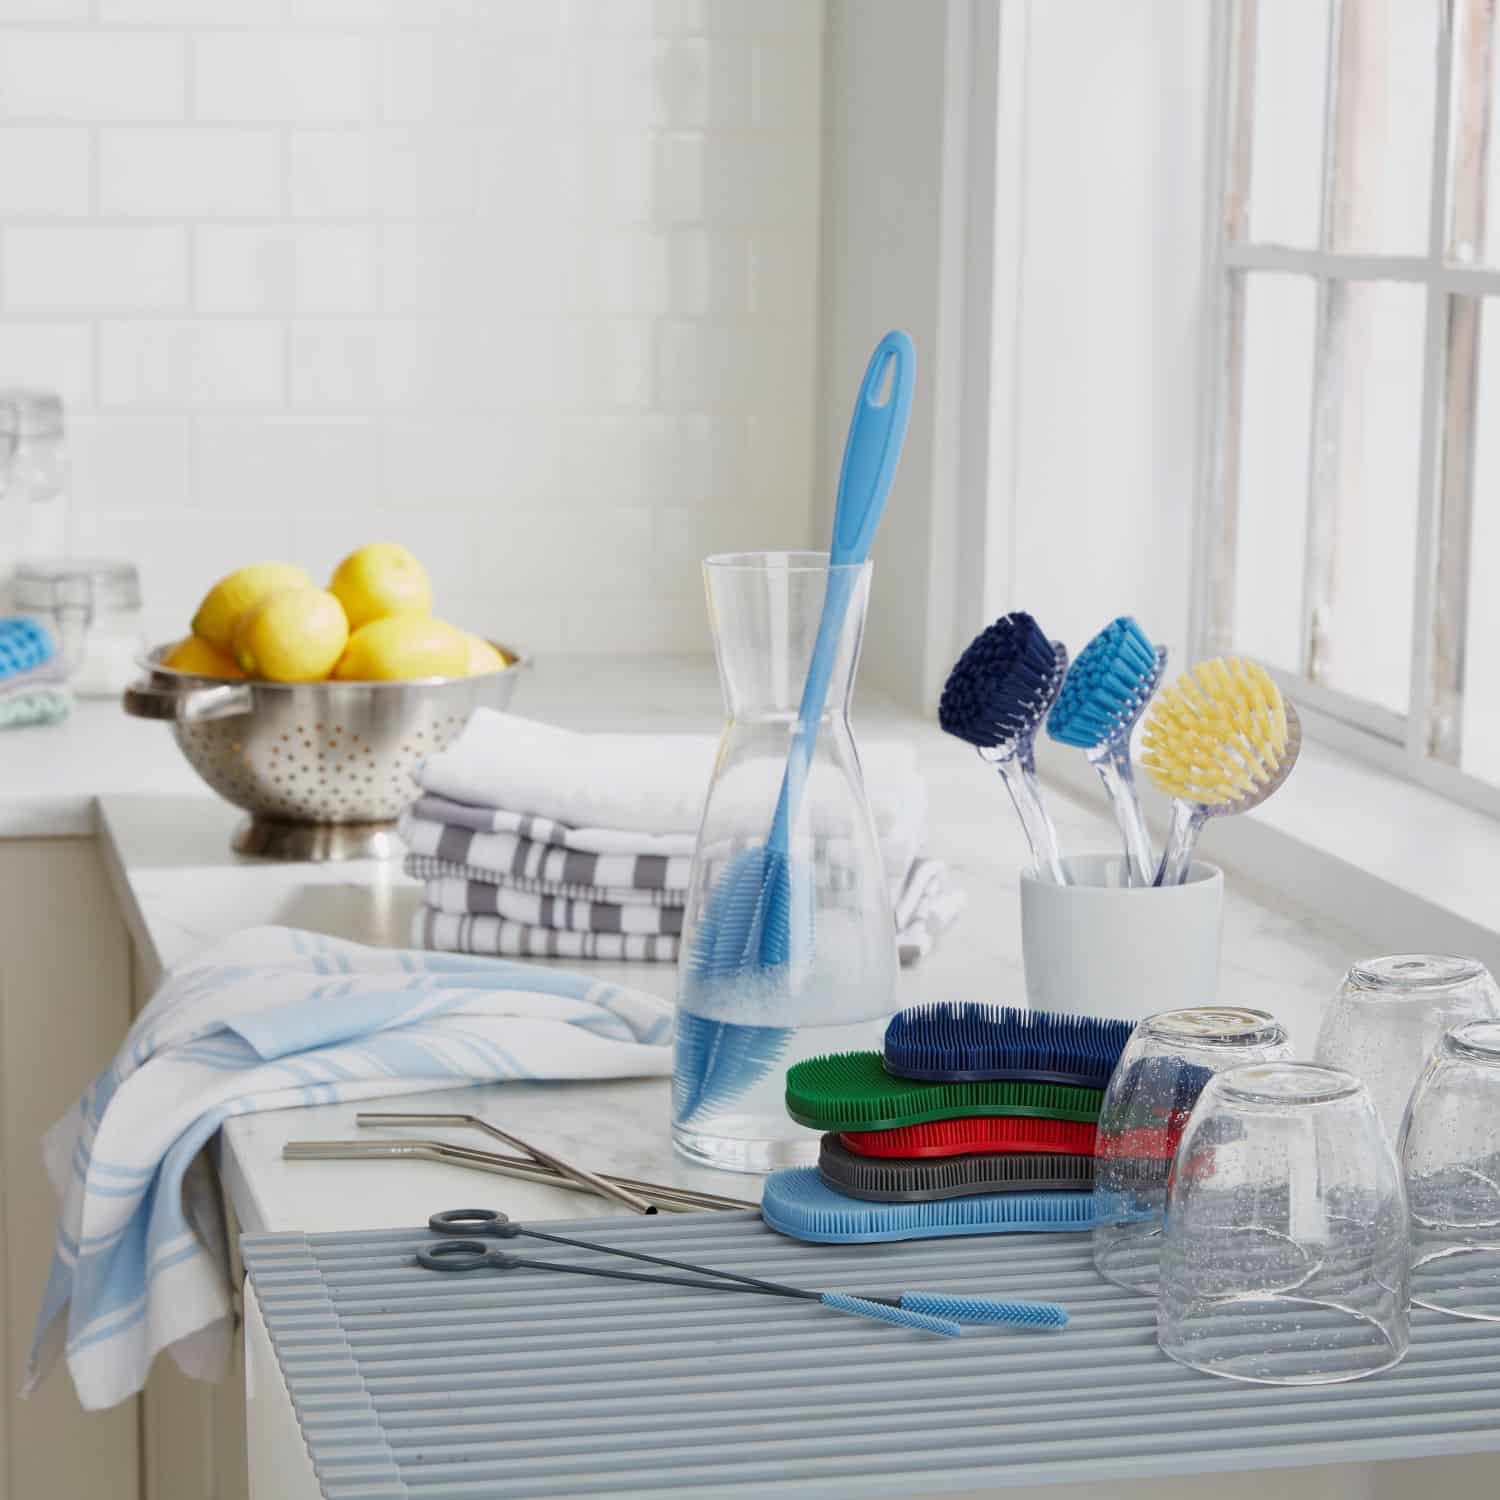 spring cleaning your kitchen, spring cleaning tips, how to spring clean